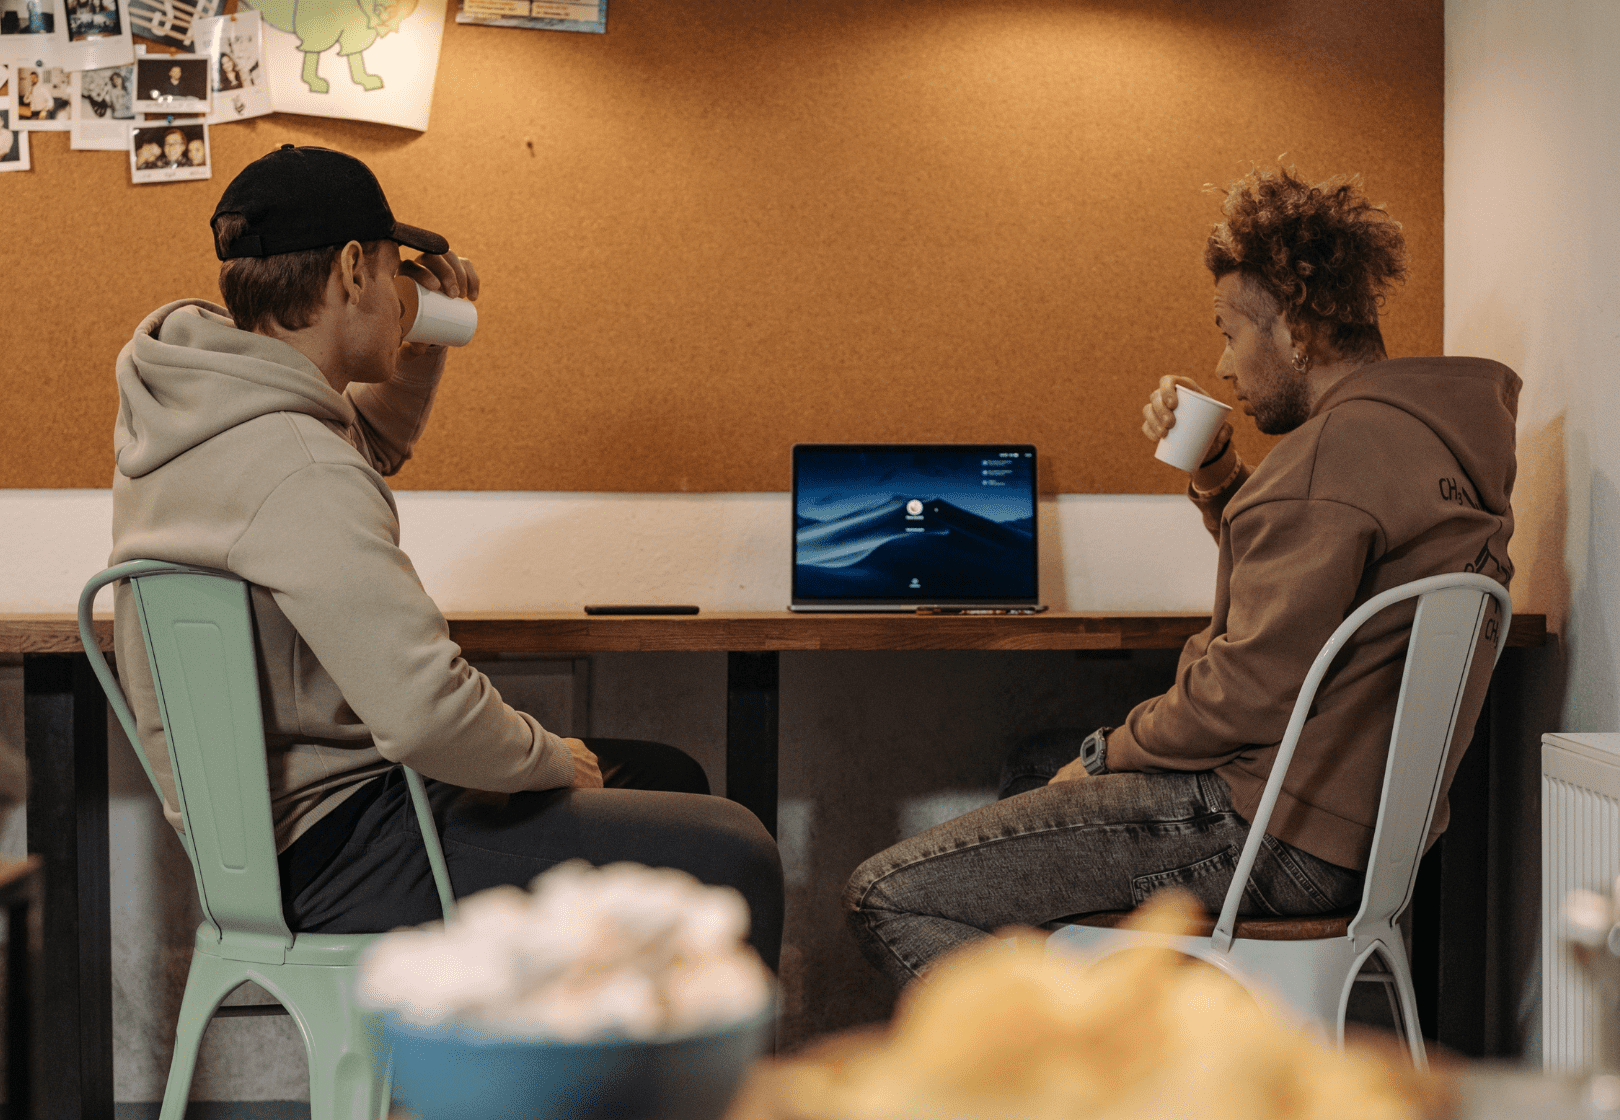 Two men at a cafe looking at a laptop and drinking coffee